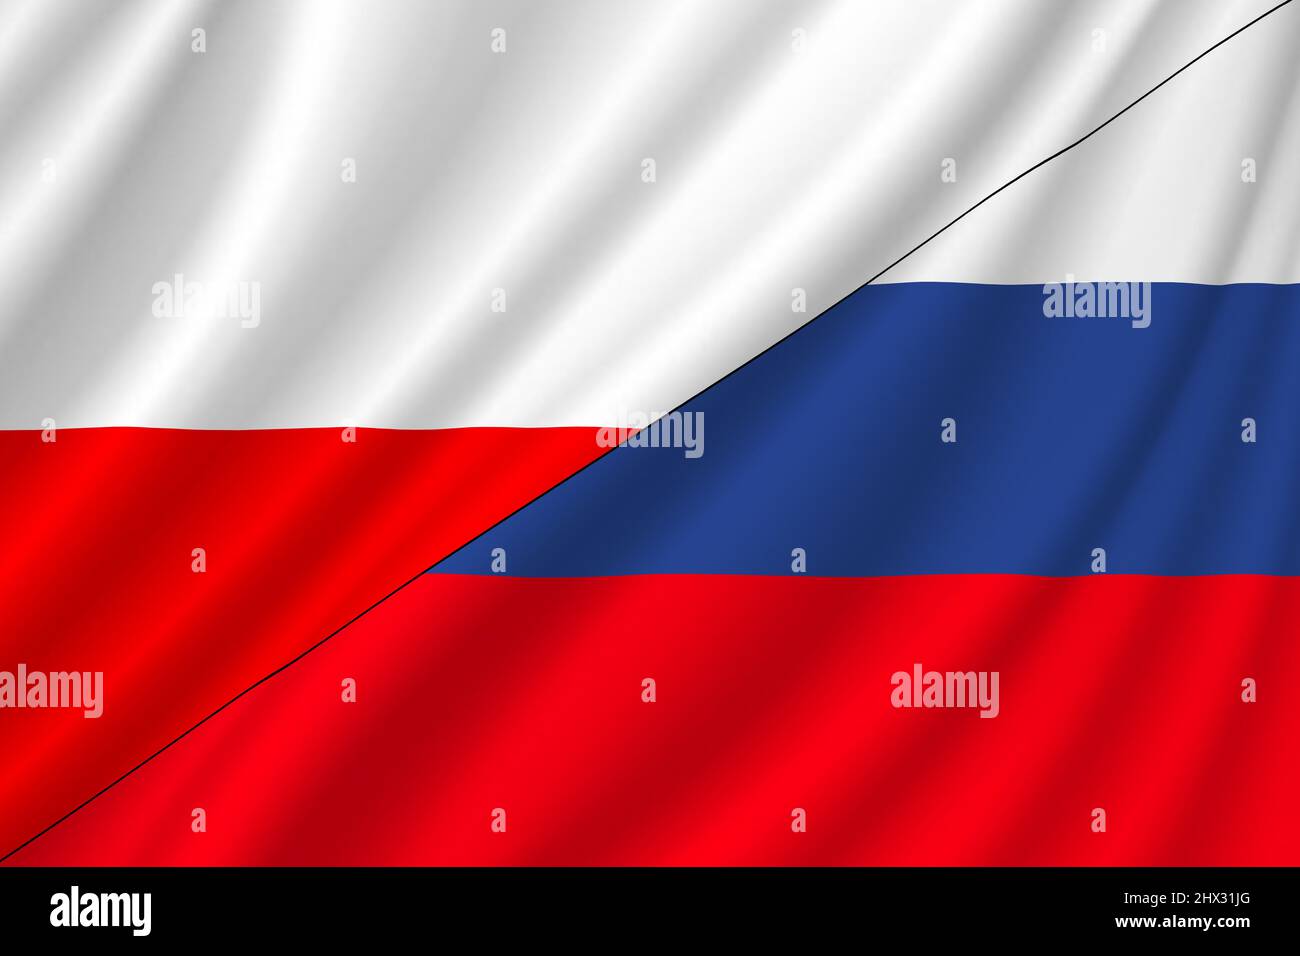 Conflict between Russia and Poland war concept. Russian flag and Poland flag background. Flag with ripples. Horizontal design. Illustration. Map. Stock Photo